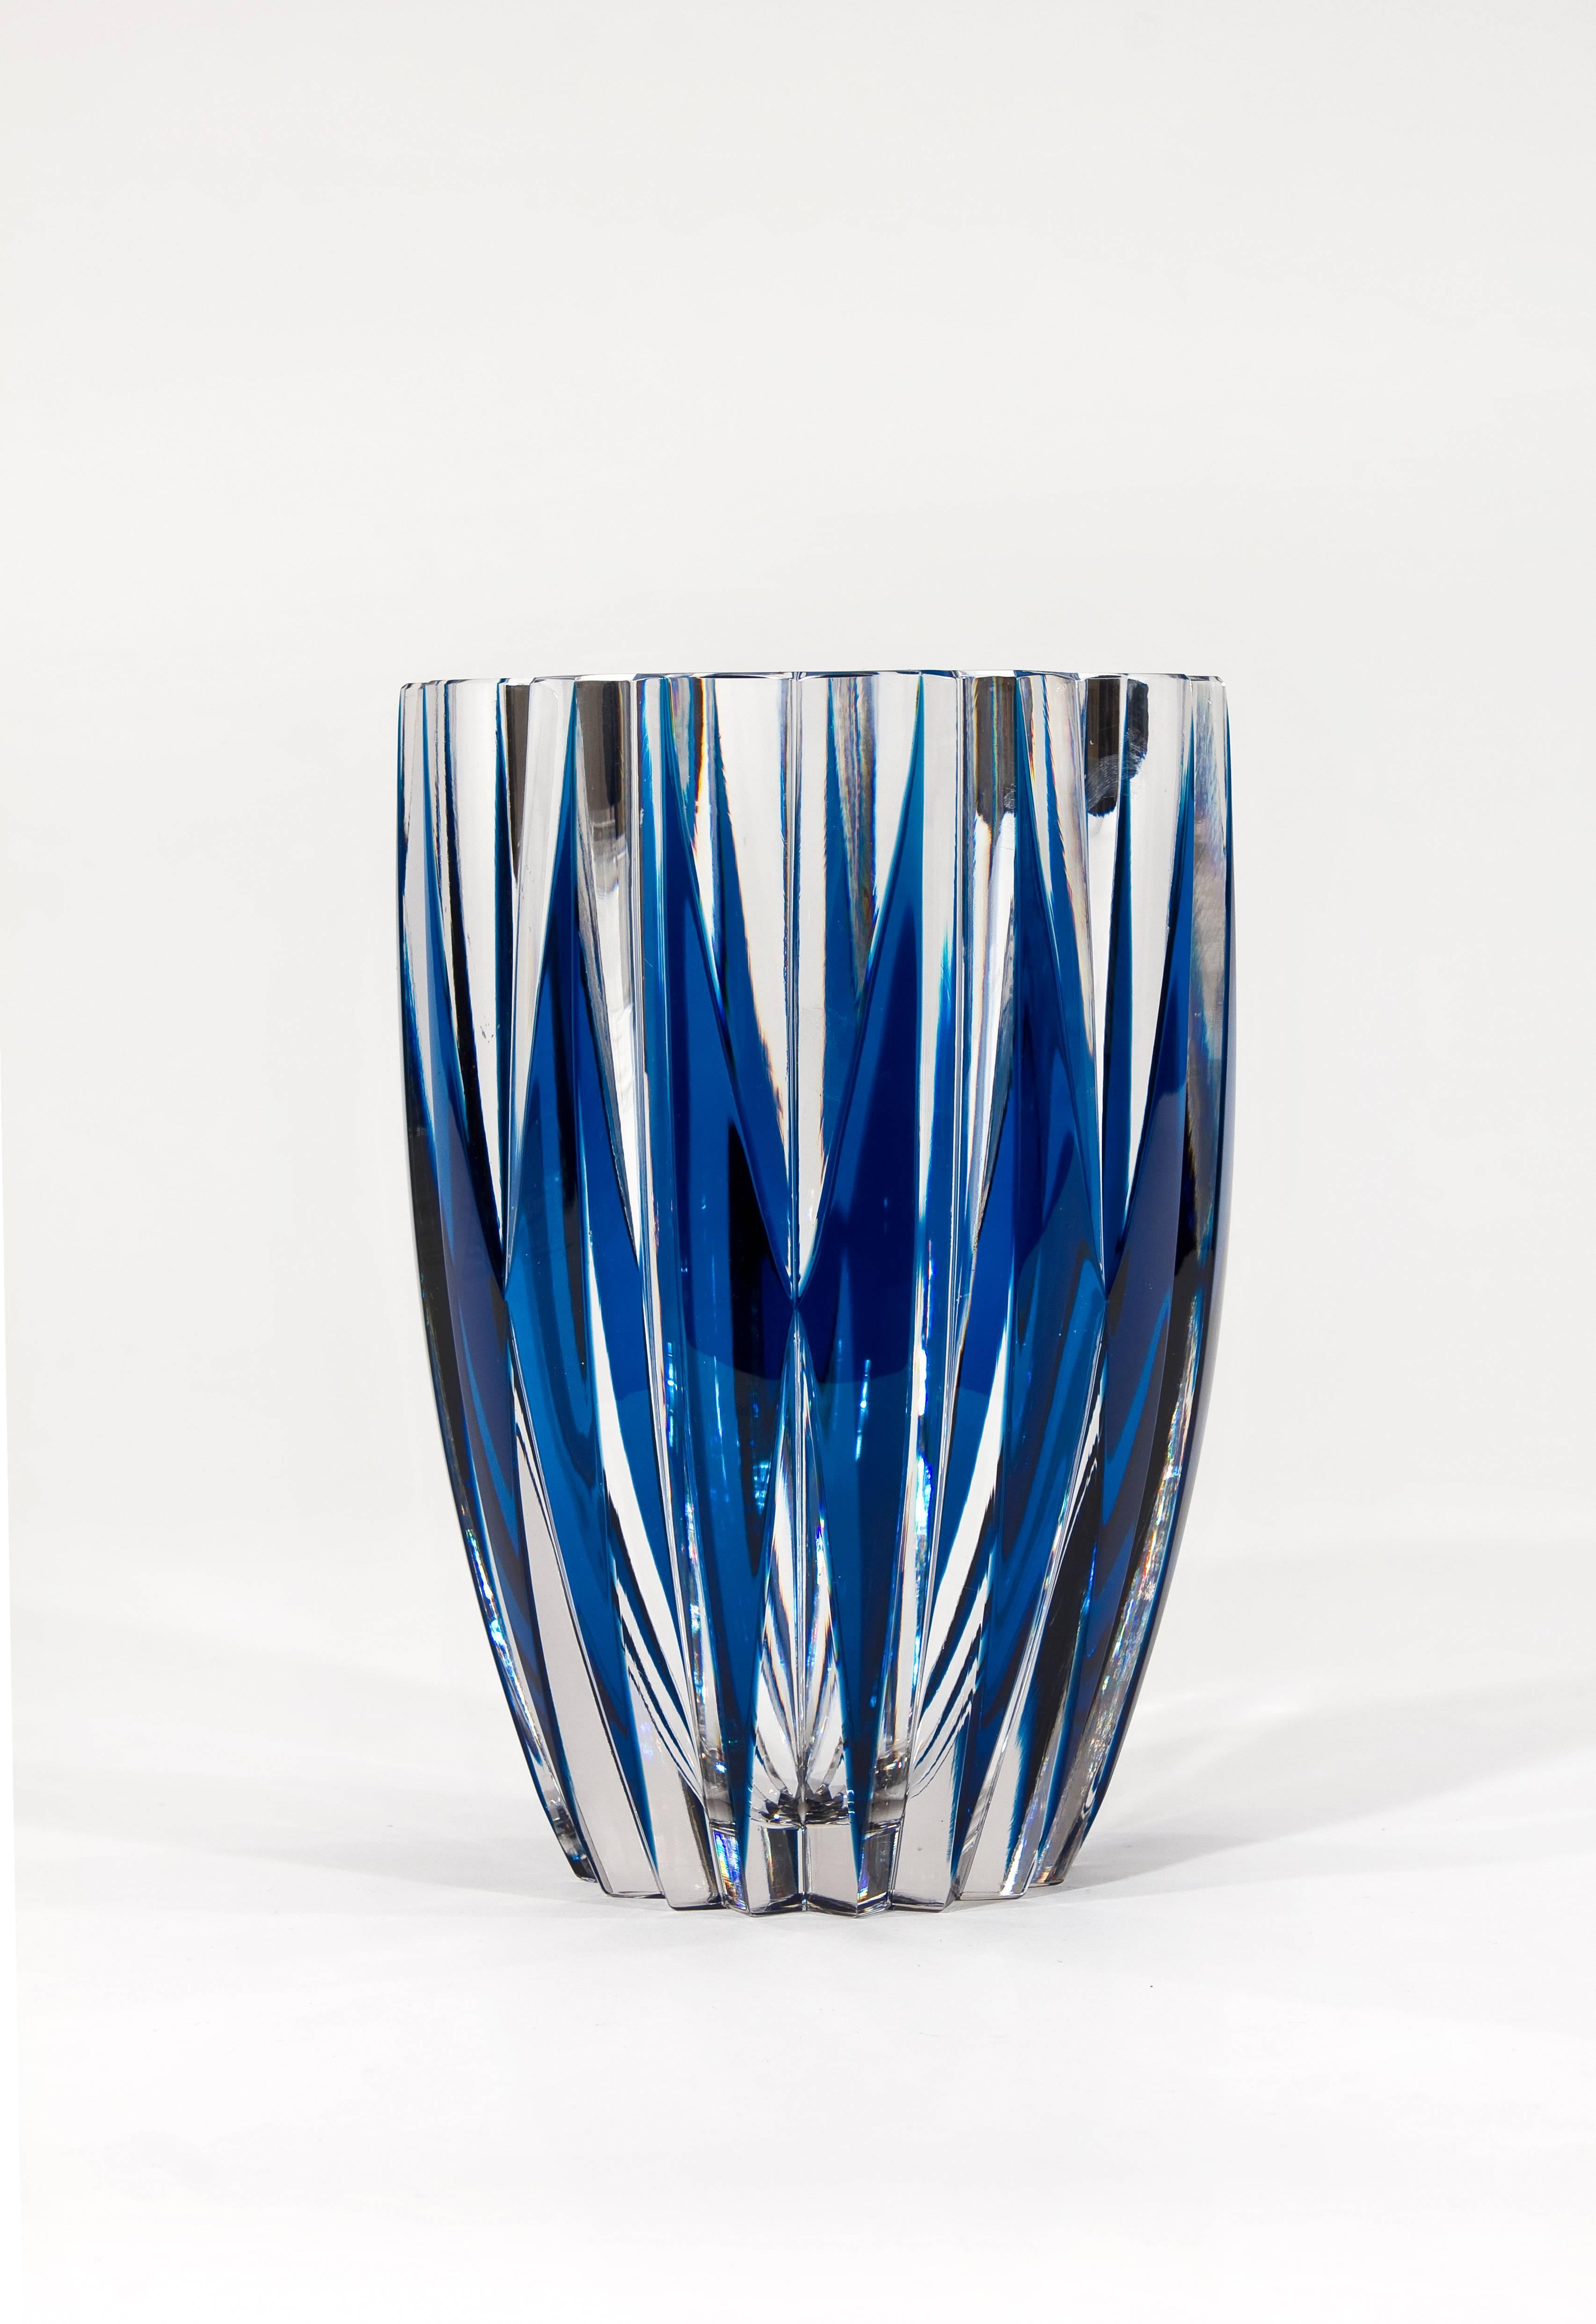 This signed St. Louis handblown crystal vase is a perfect example of the company's incredible workmanship. The thick, handblown crystal blank is cut in a complex geometrically perfect pattern of alternating diamonds of teal blue contrasting with